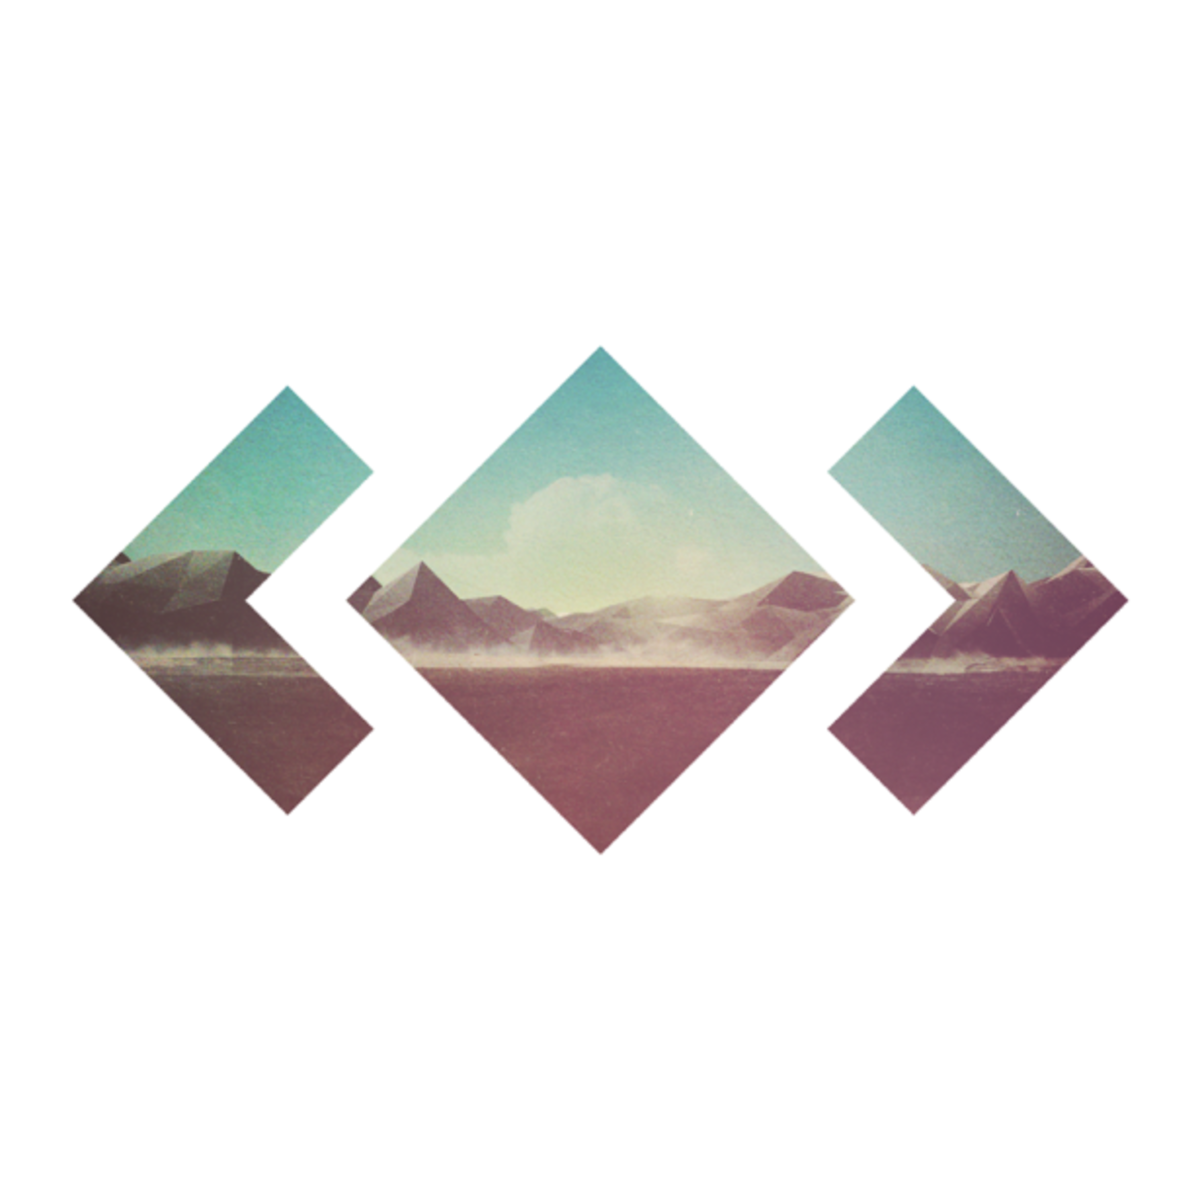 Madeon Releases 6 Tracks, Charts Tour